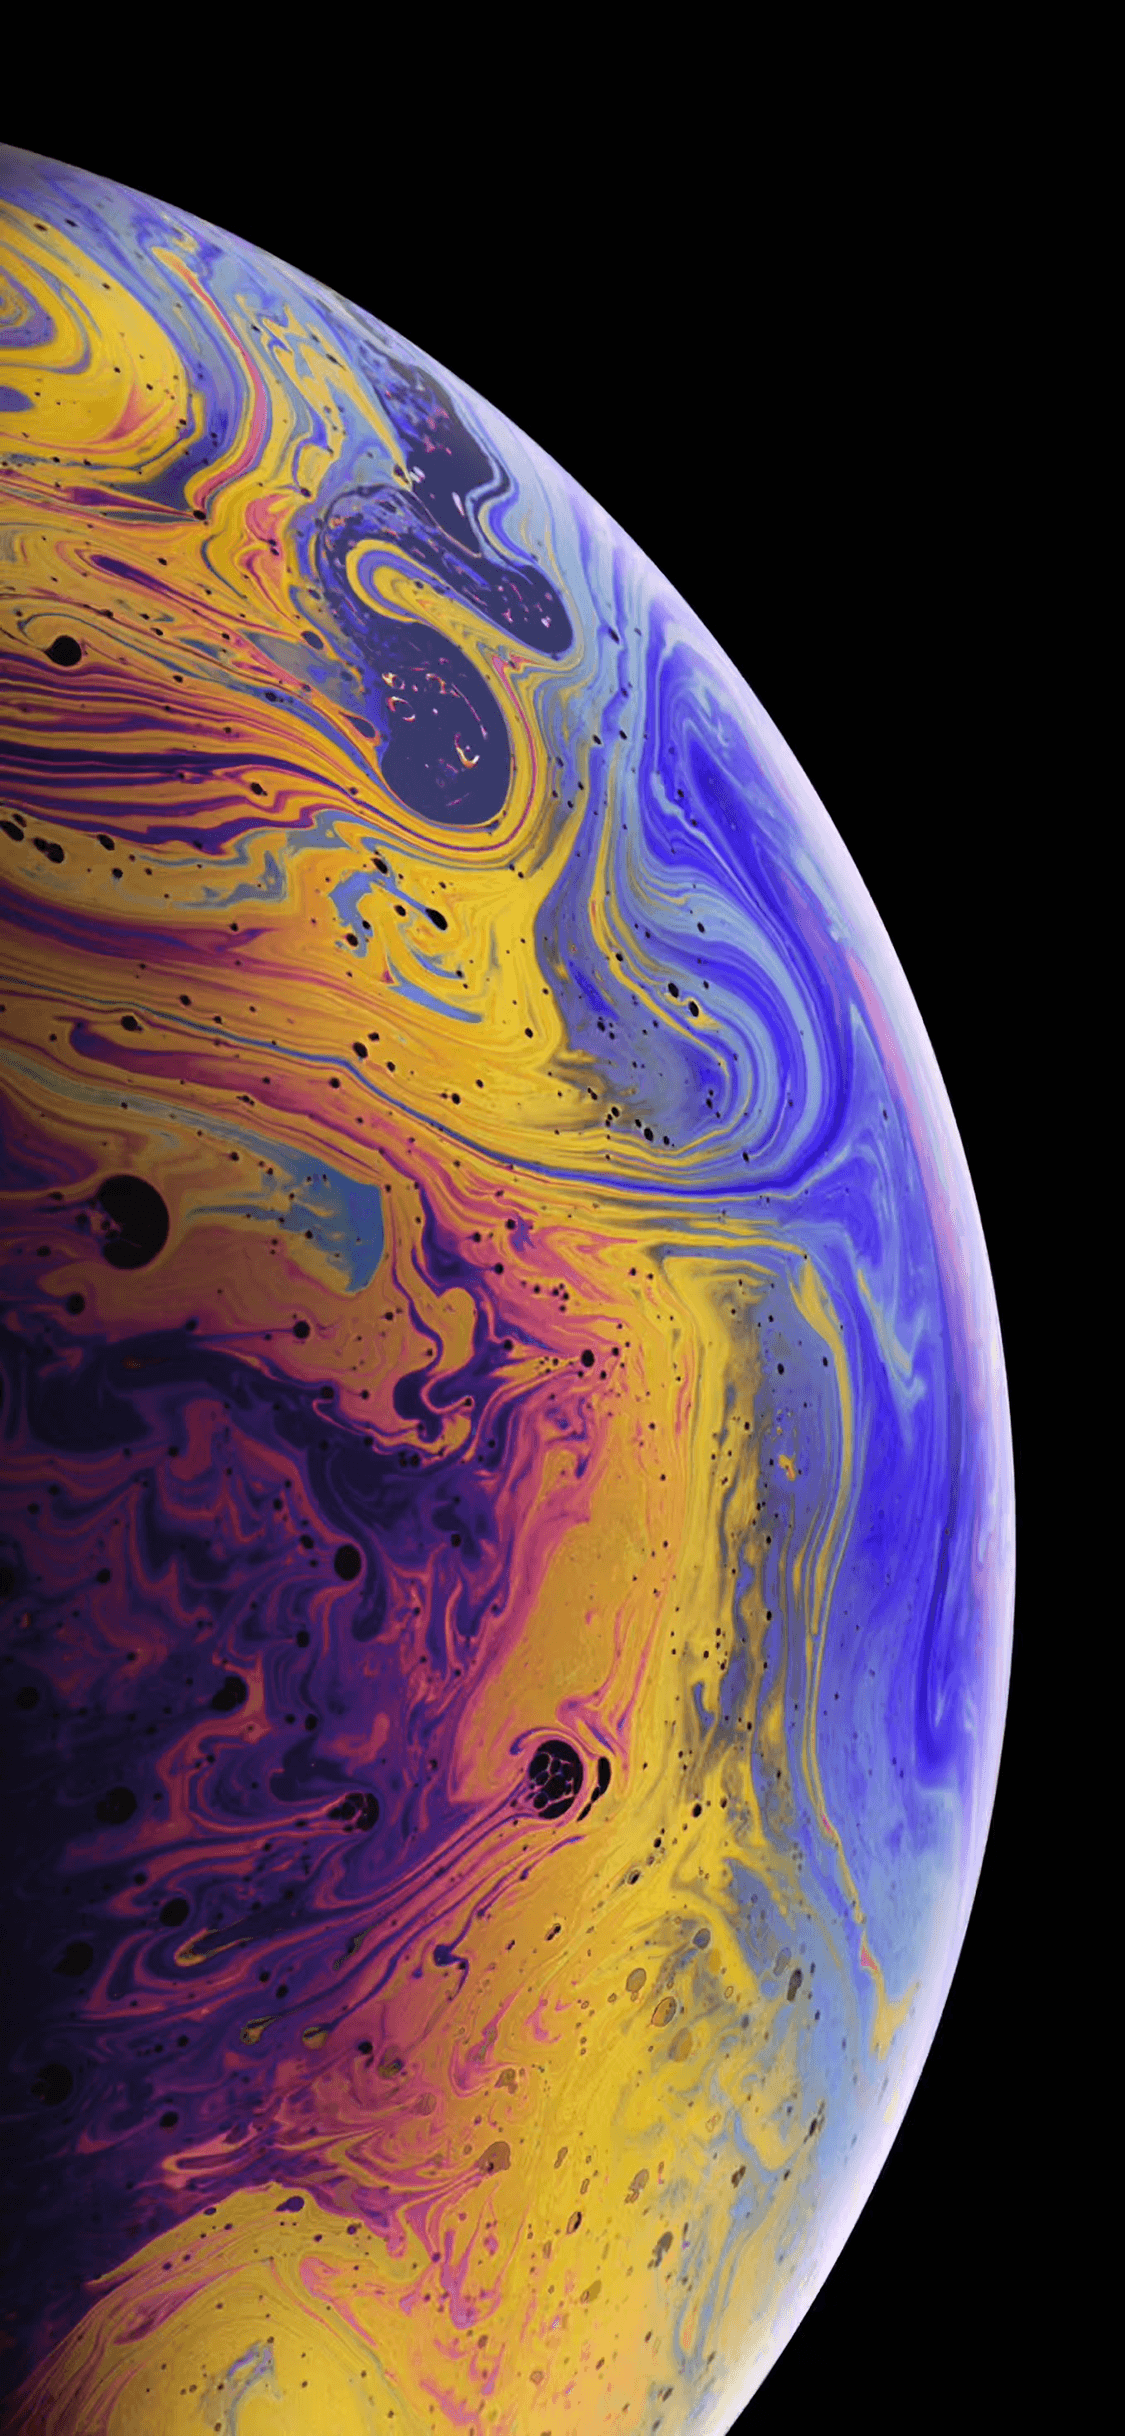 Wallpapers iPhone Xs, iPhone Xs Max, and iPhone Xr